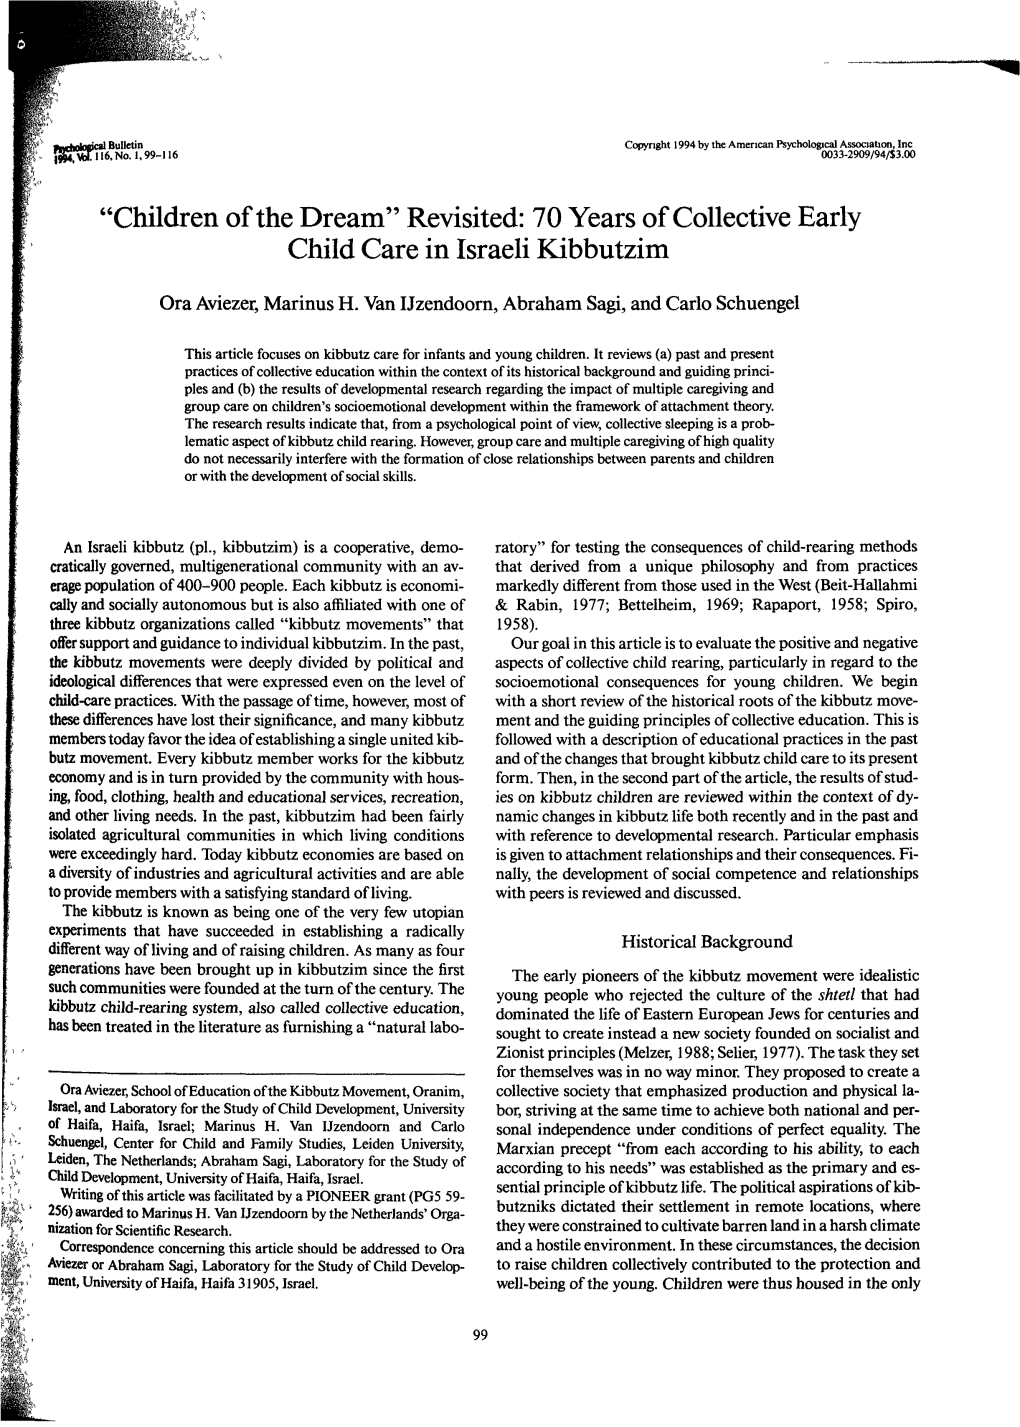 Children of the Dream" Revisited: 70 Years of Collective Early Child Gare in Israeli Kibbutzim